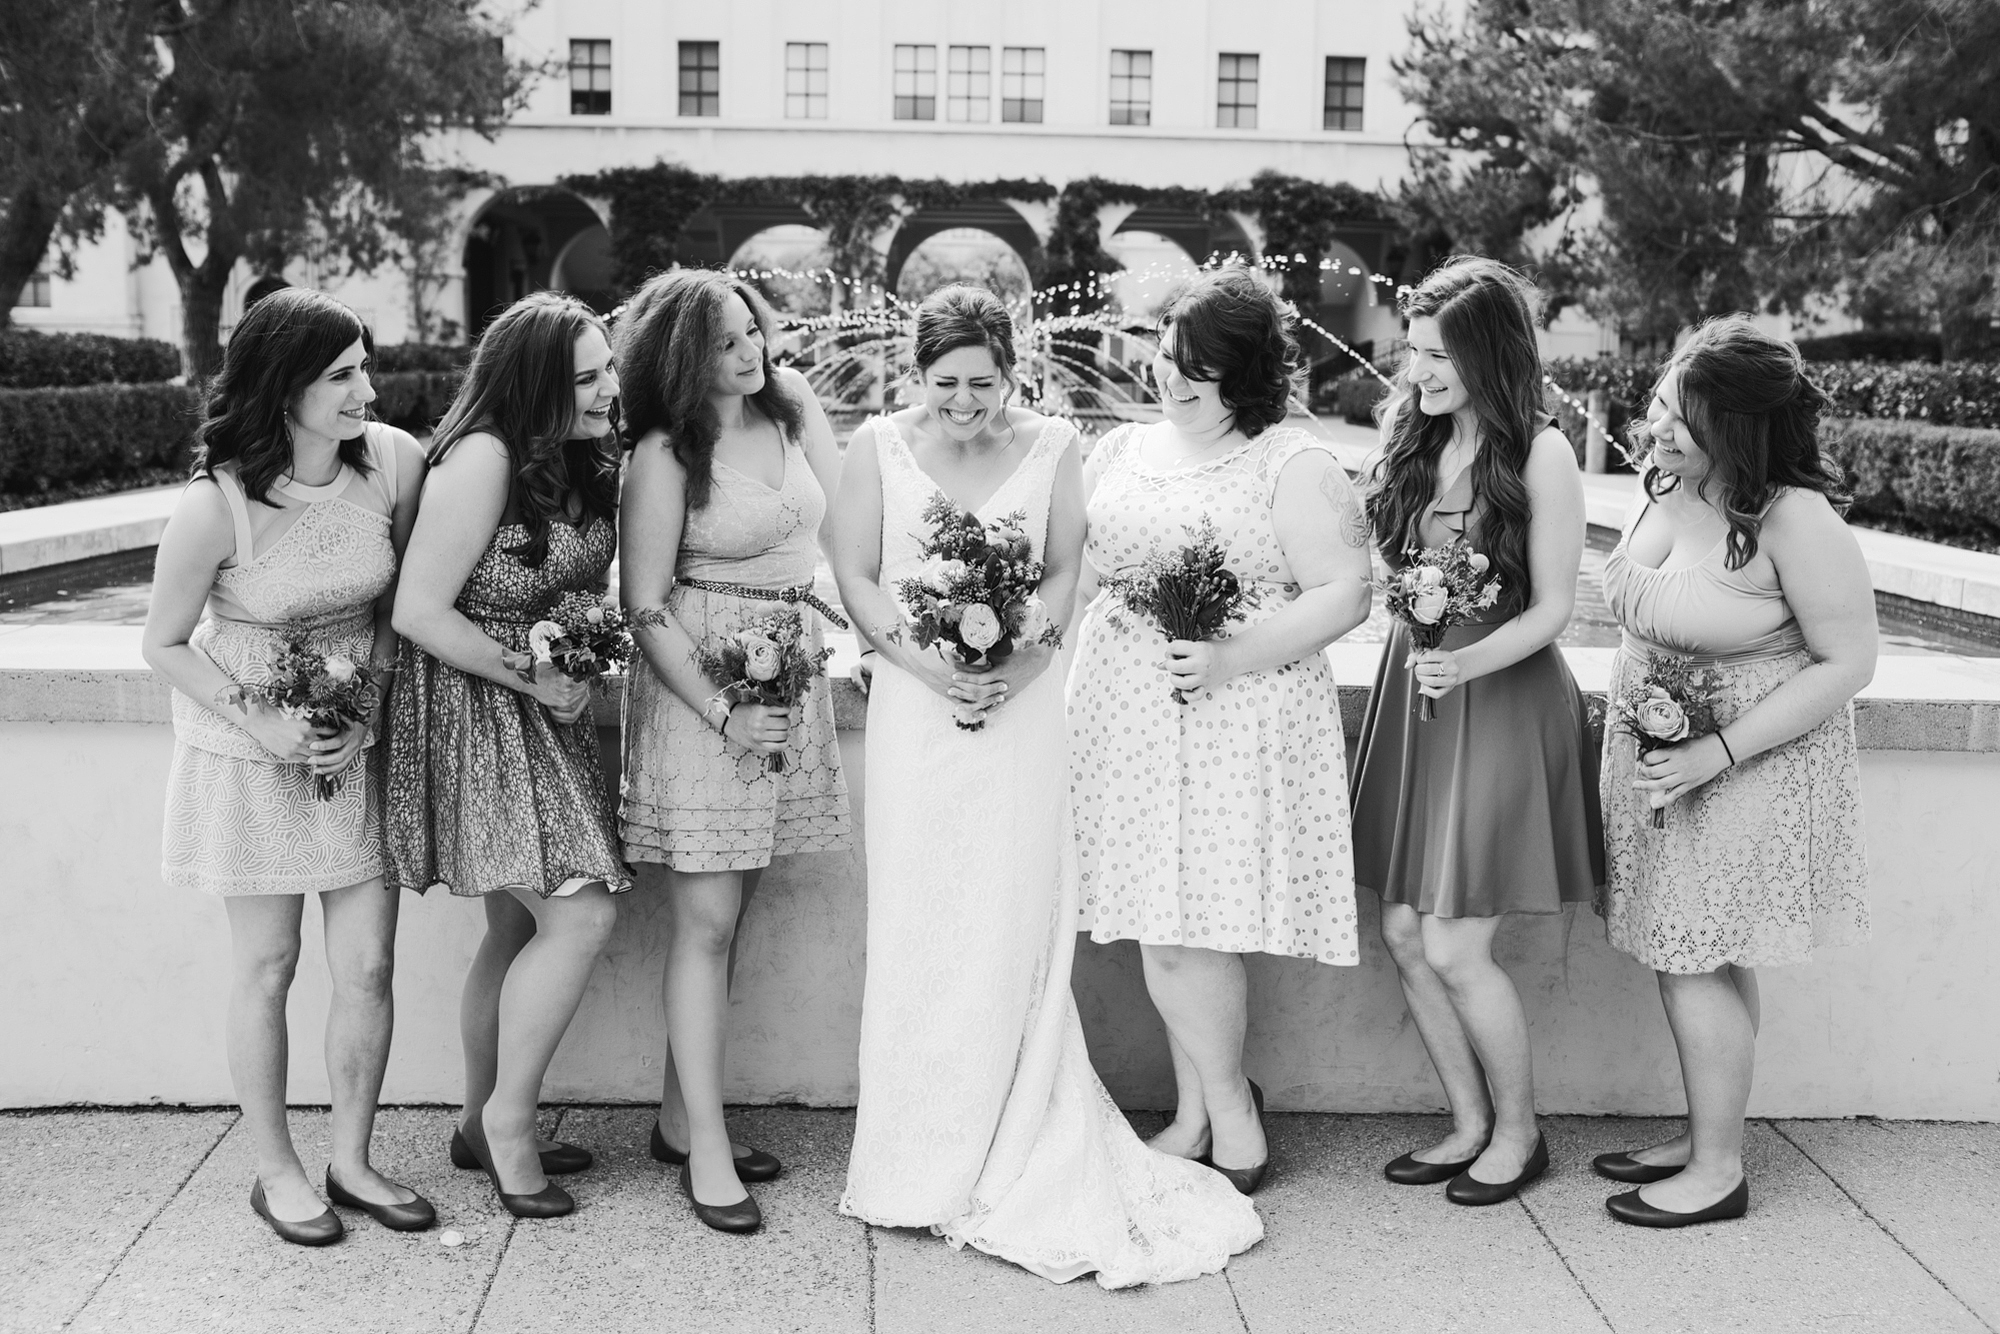 This is a really cute bride and bridesmaid photo!